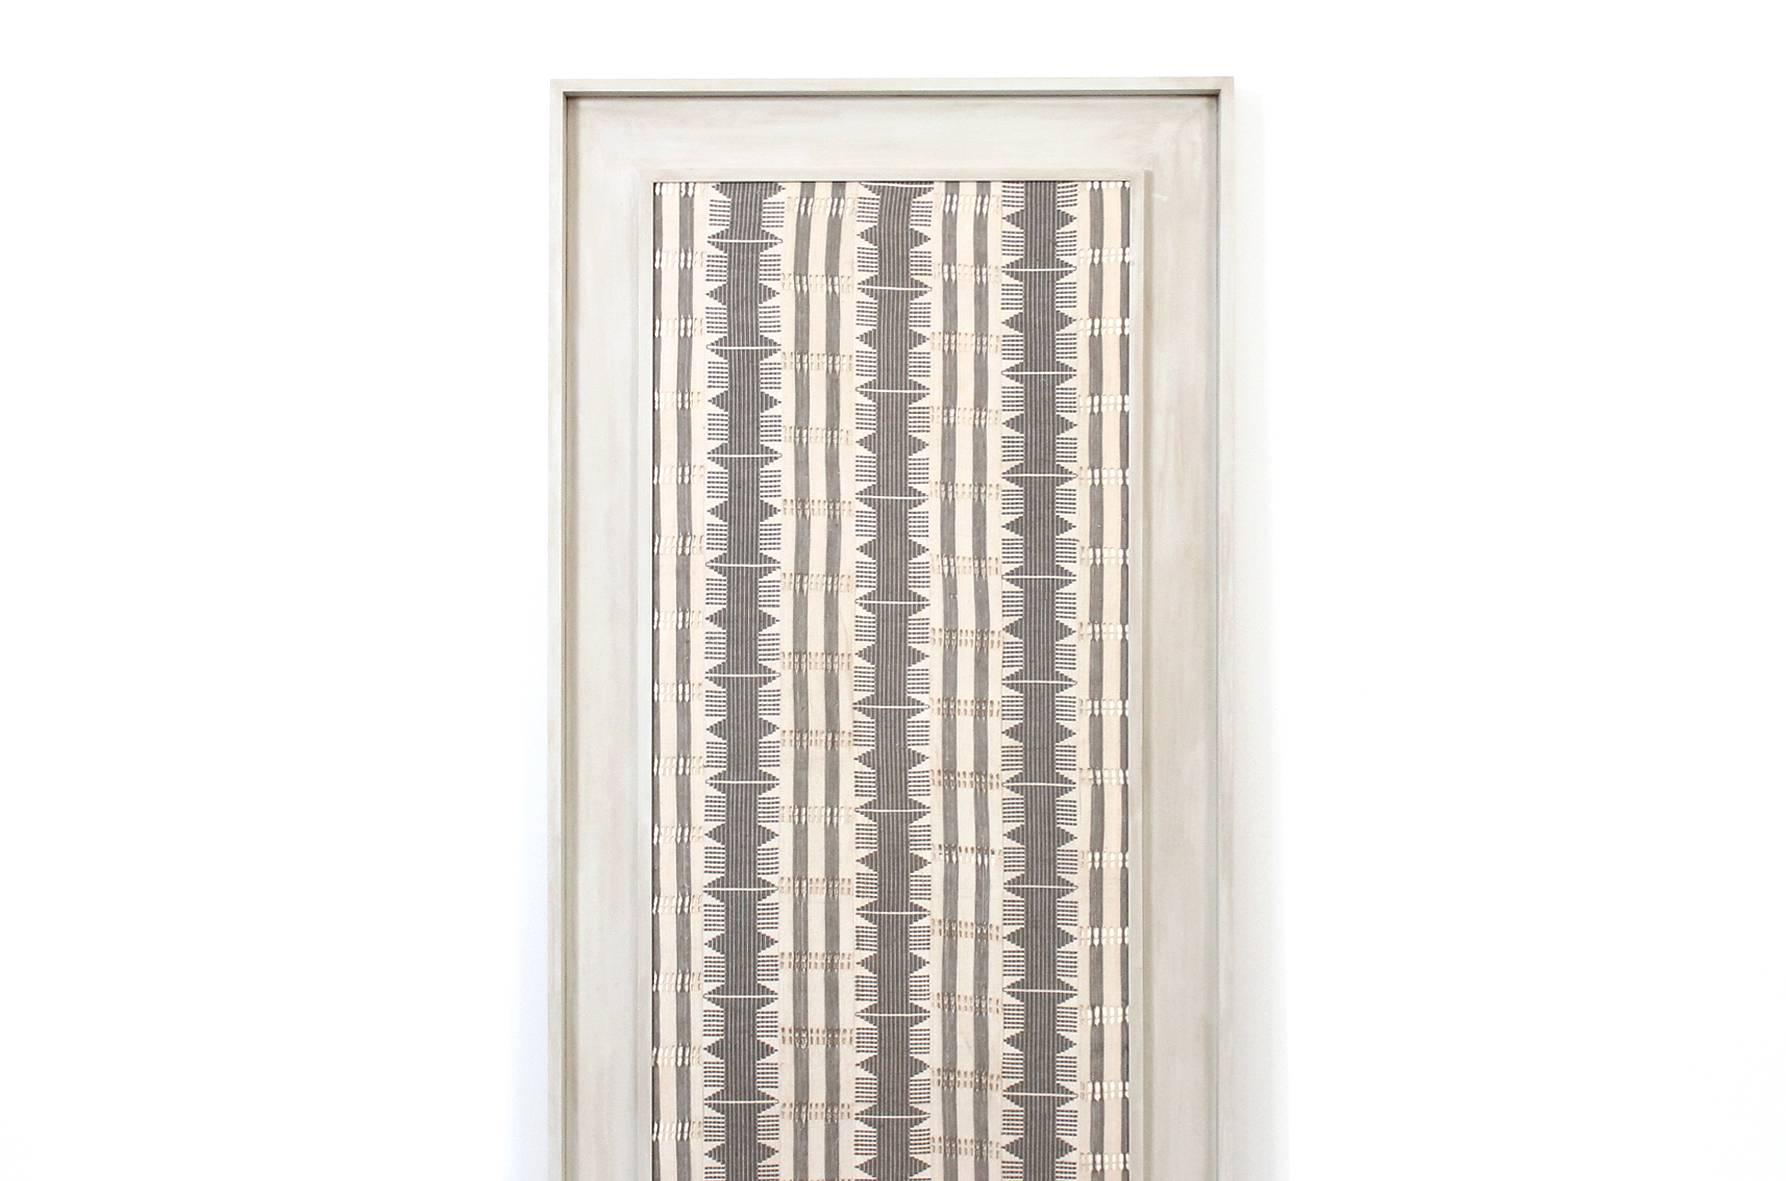 Impressive large scale Modernist textile in custom frame. This woven piece is reminiscent of work by Jack Lenor Larsen and British fiber artist Peter Collingwood.

____

We're offering our customers free domestic shipping on all items during the